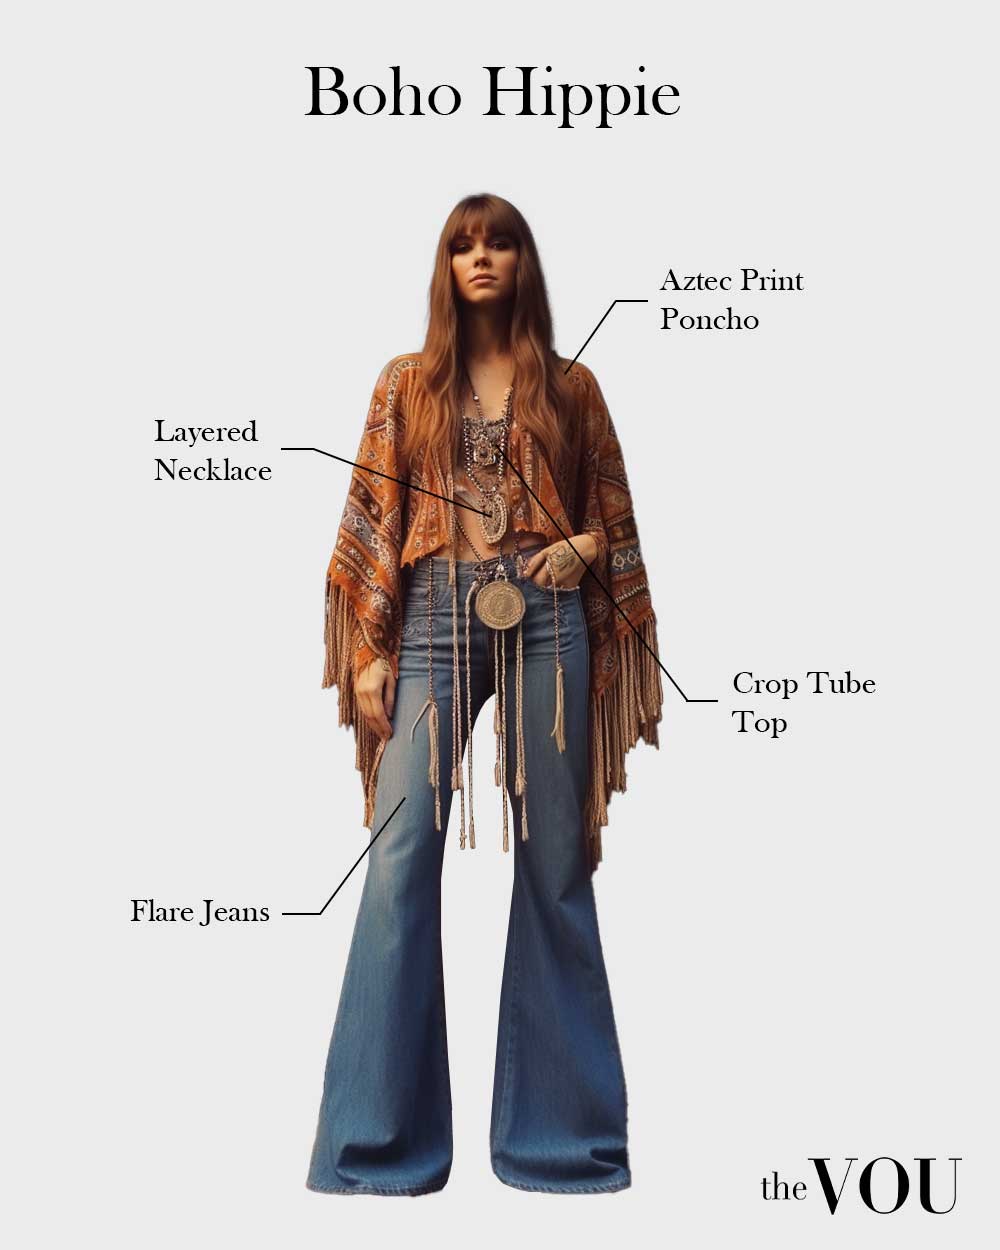 Boho Hippie style with aztec print poncho, tupe ctop top, layered necklace, flare jeans